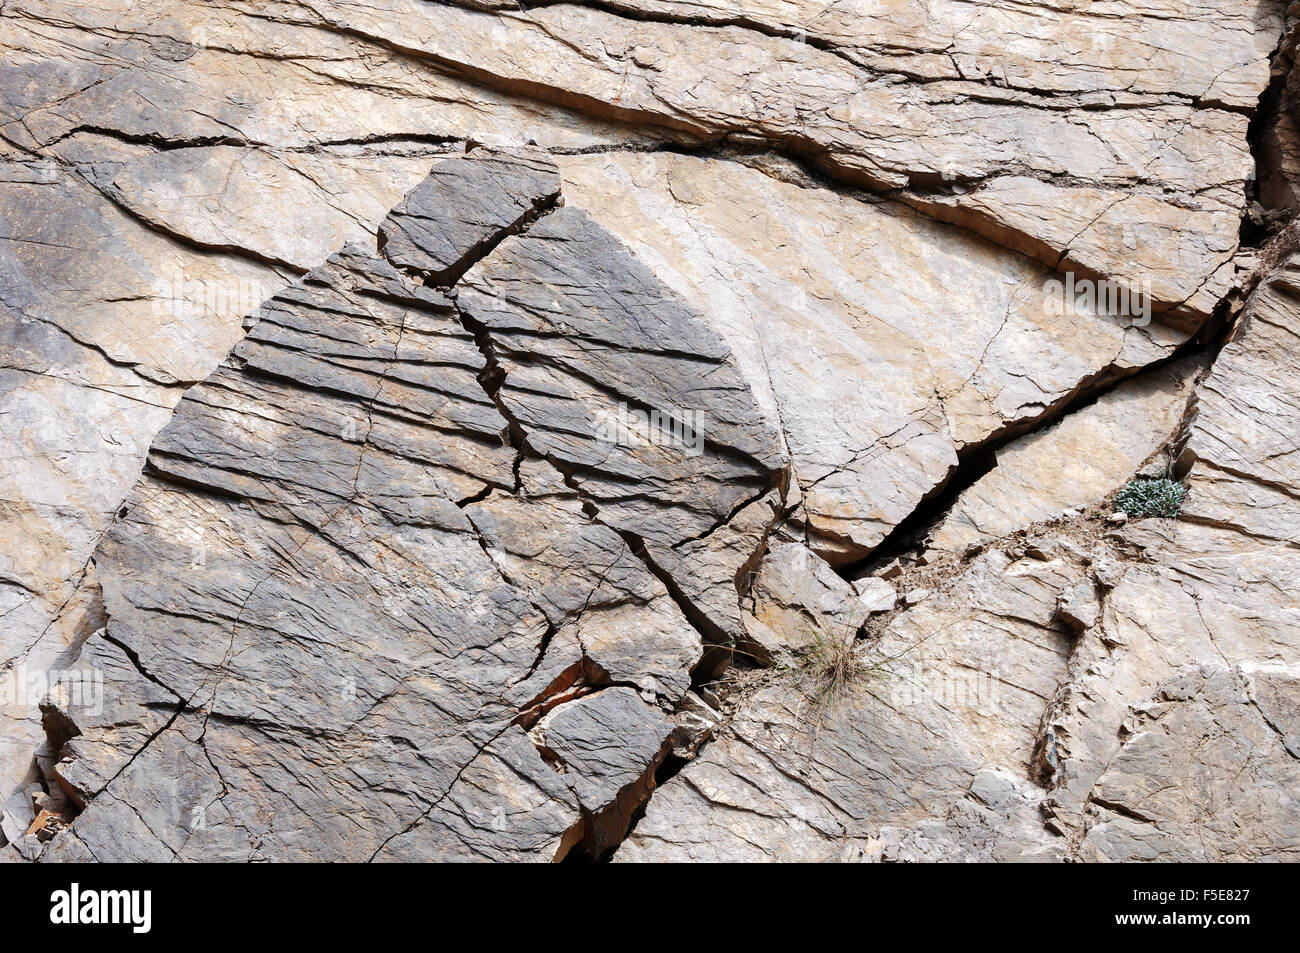 Shale rock outdoors as background sunlight Stock Photo